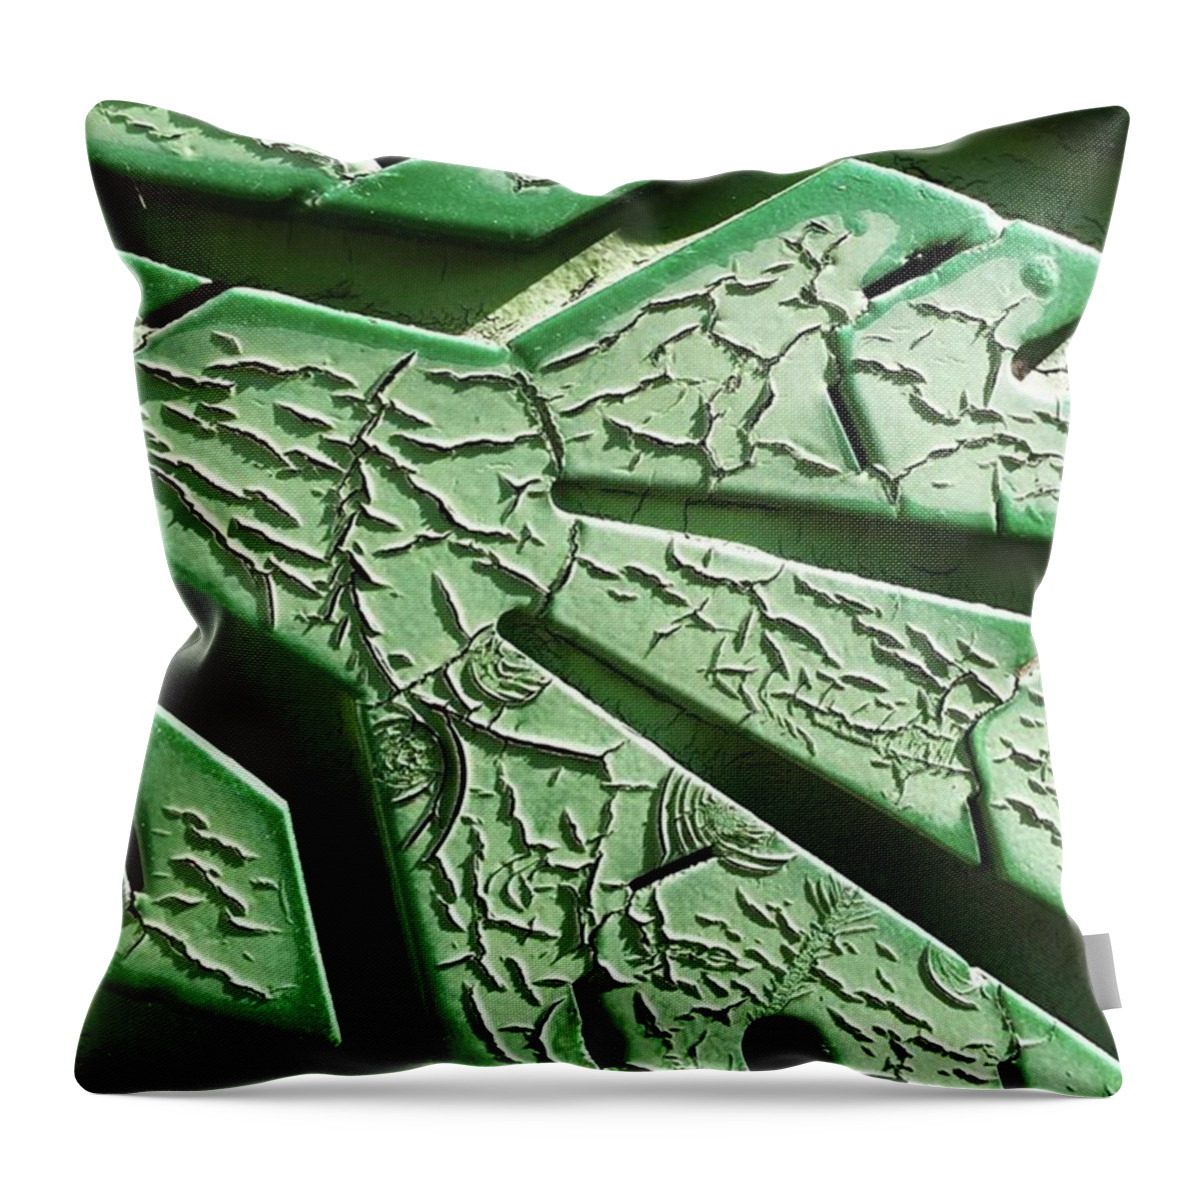 Crackle Throw Pillow featuring the photograph Cracked Up. #green #crackle by Ginger Oppenheimer